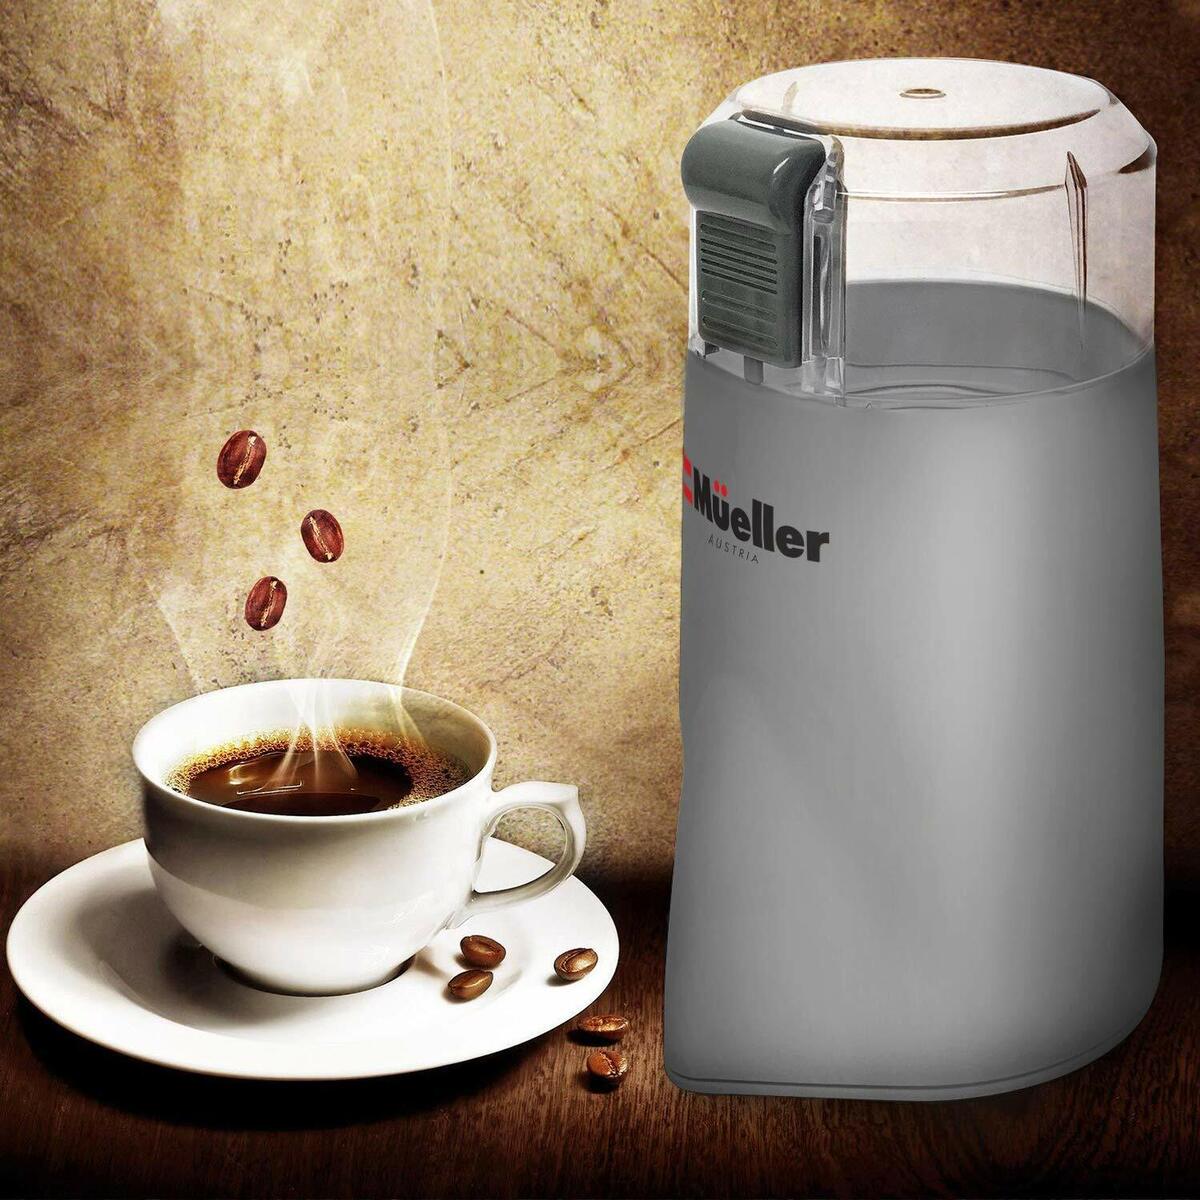 Mueller Austria Hypergrind Precision Electric Spice/Coffee Grinder Mill with Large Grinding Capacity and Powerful Motor Also for Spices, Herbs, Nuts